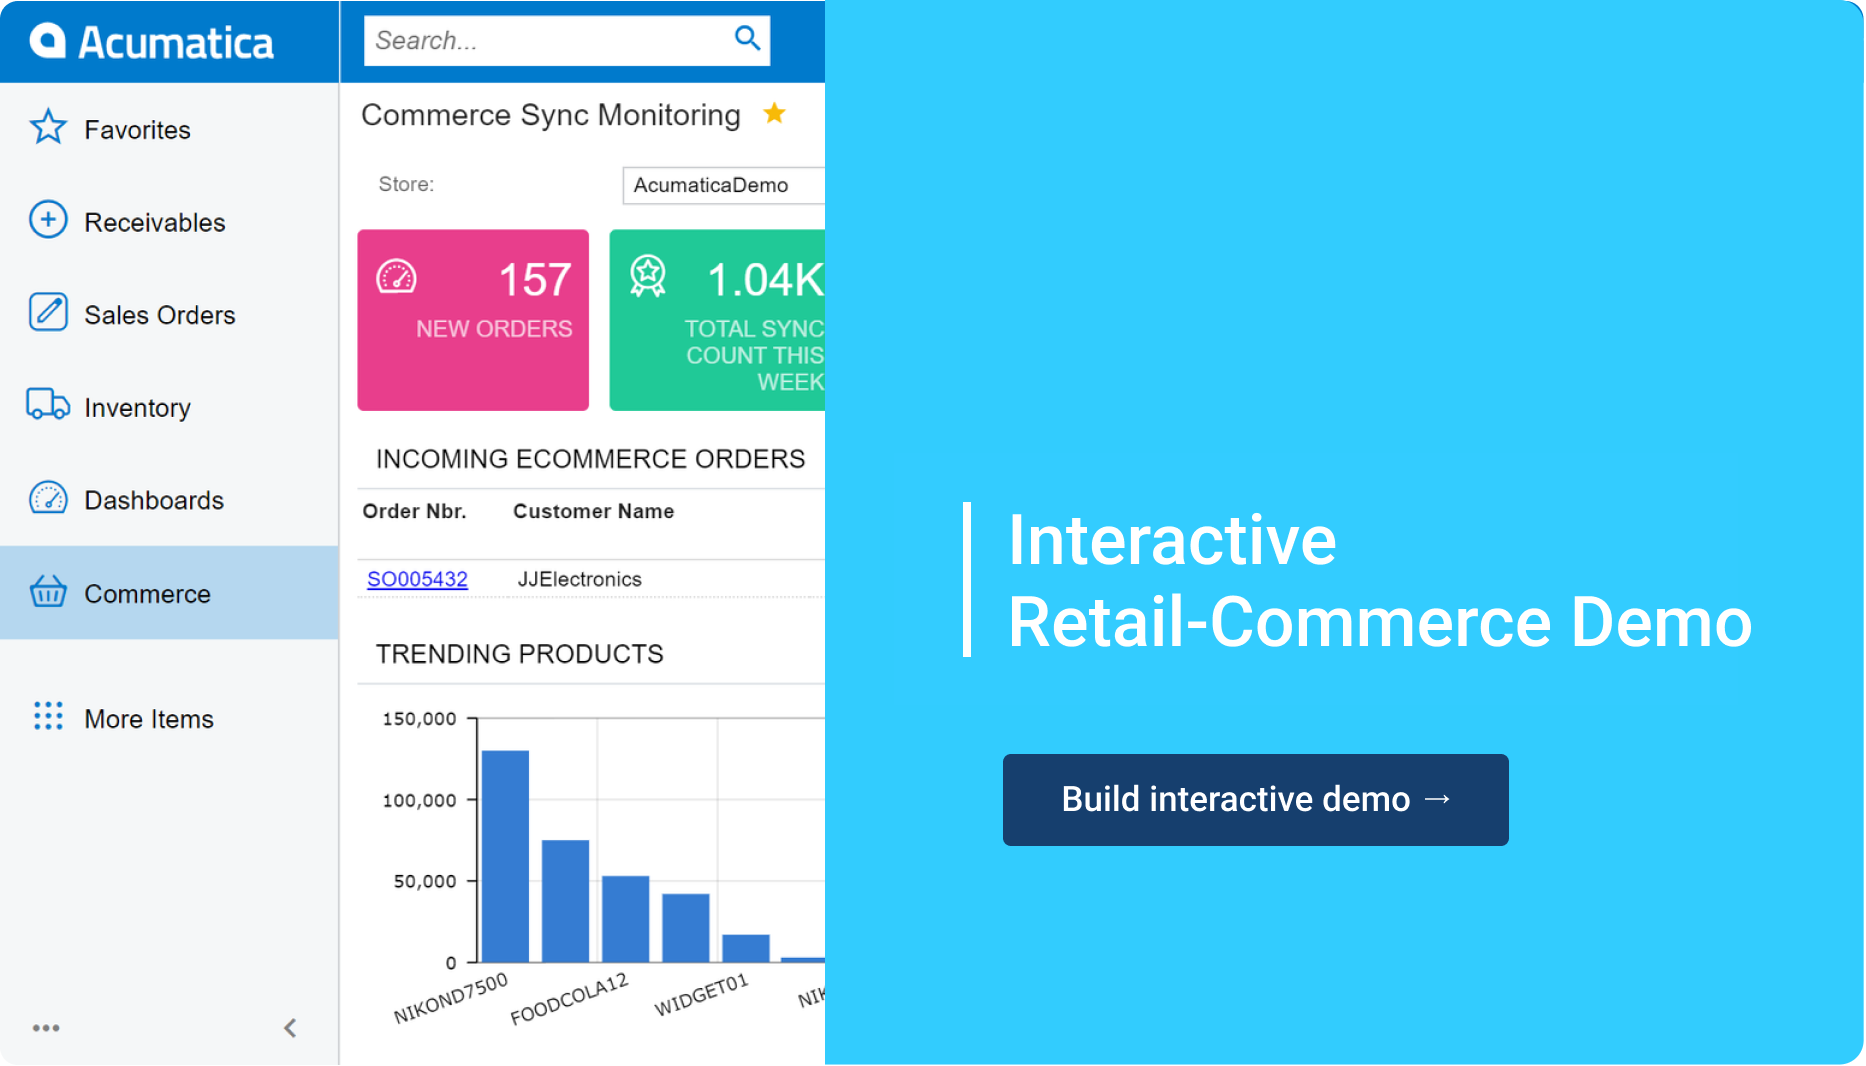 Build Your Own Retail-Commerce Demo